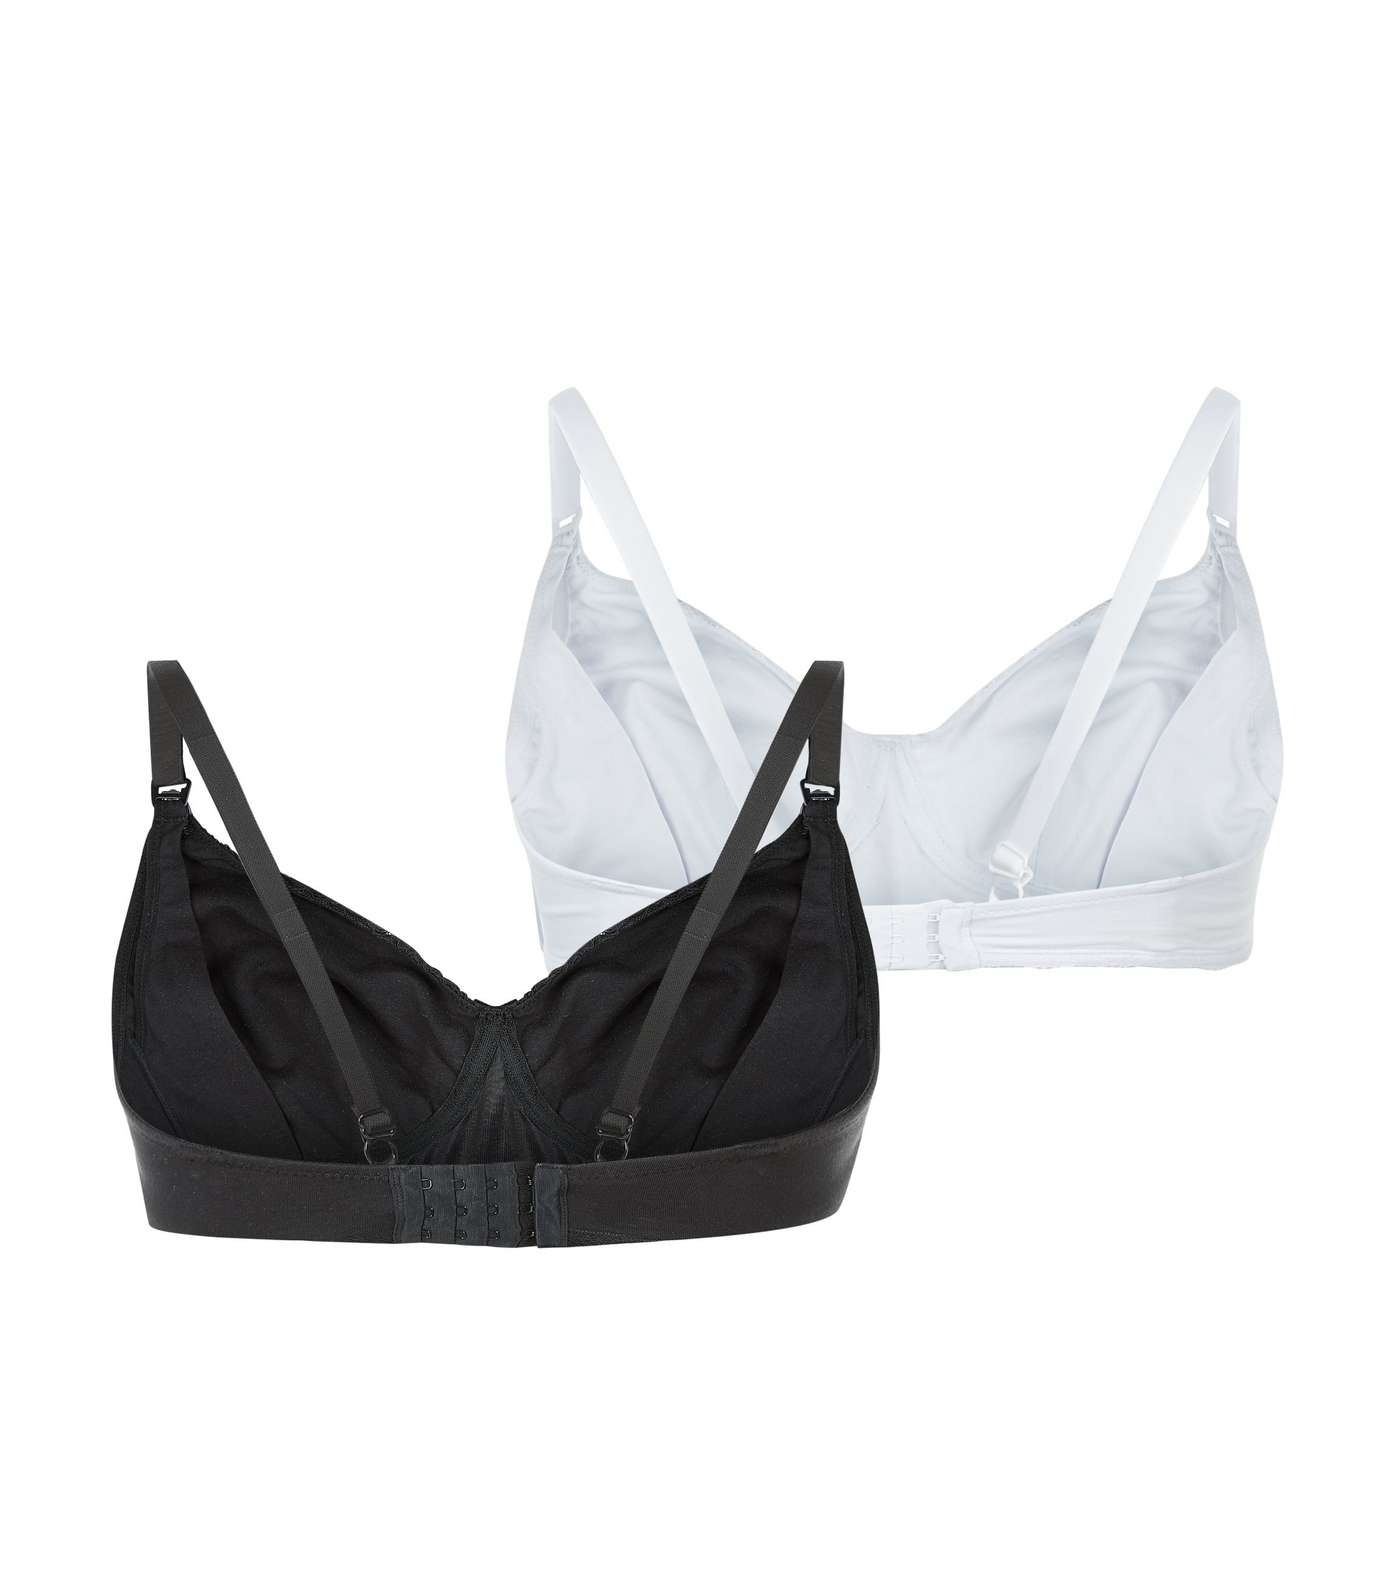 Maternity 2 Pack Black and White Soft Cup Nursing Bras Image 2